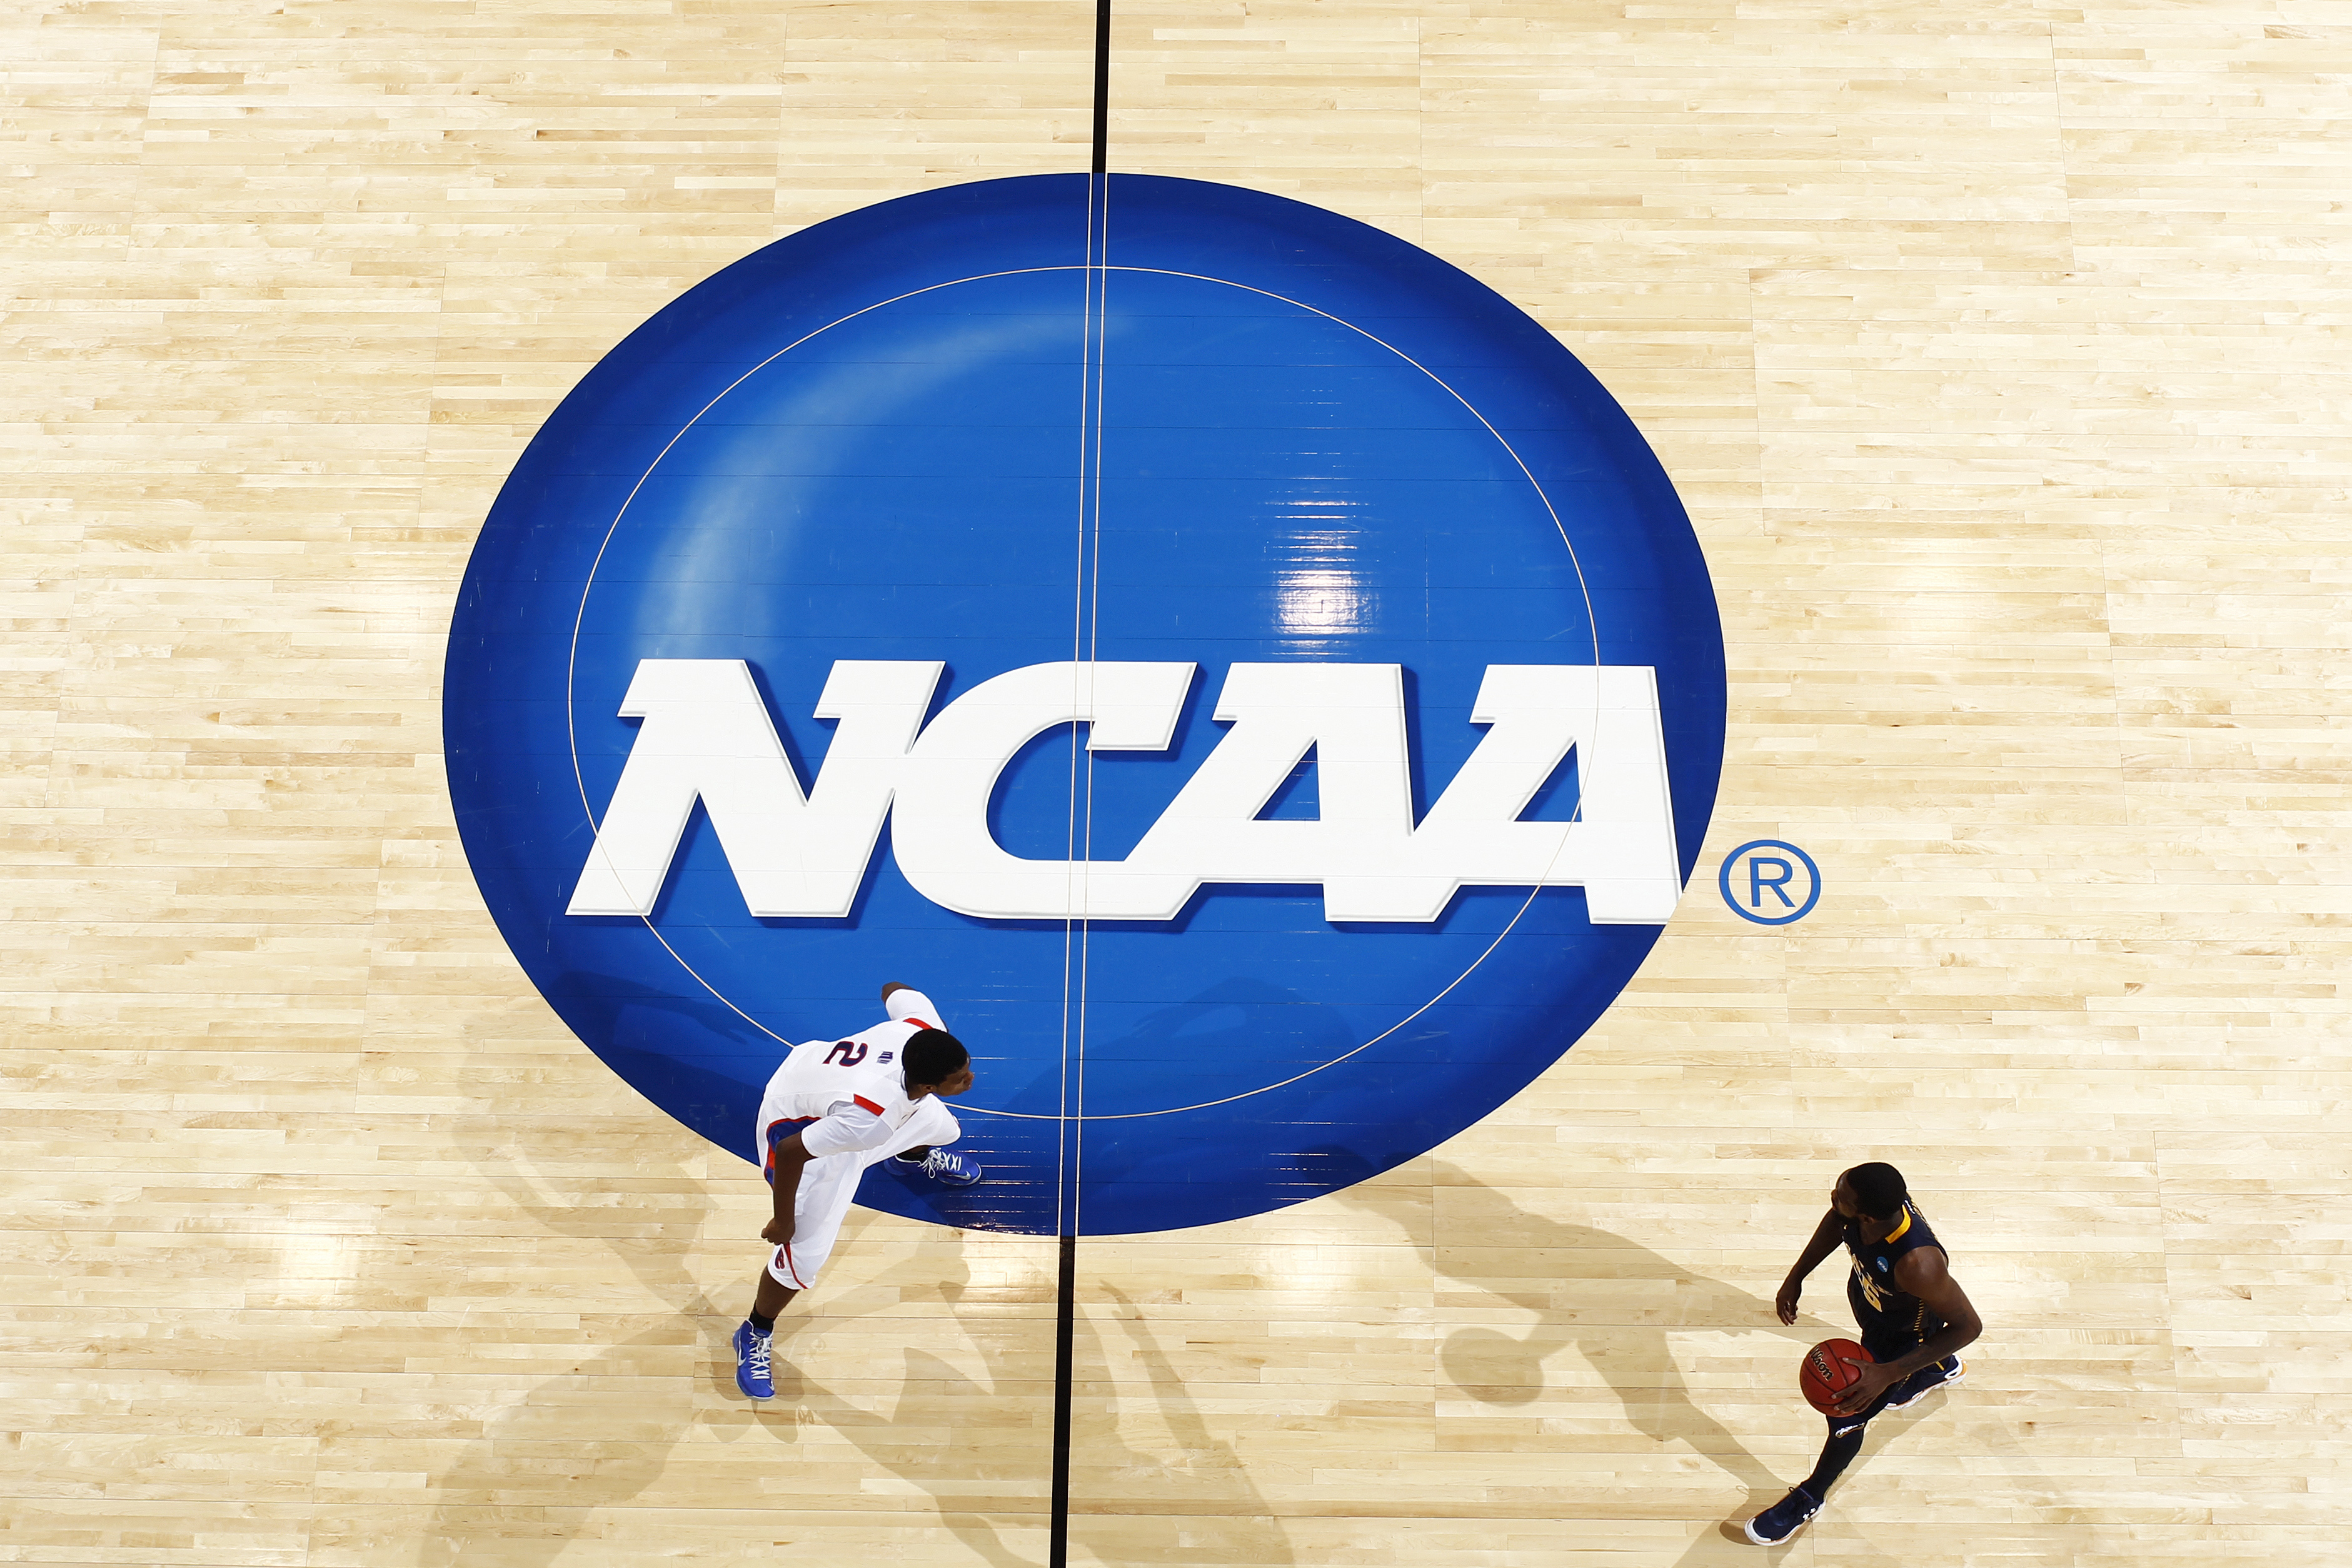 General view of the NCAA logo on the floor during action at University of Dayton Arena on March 20, 2013 in Dayton, Ohio. (Joe Robbins—Getty Images)